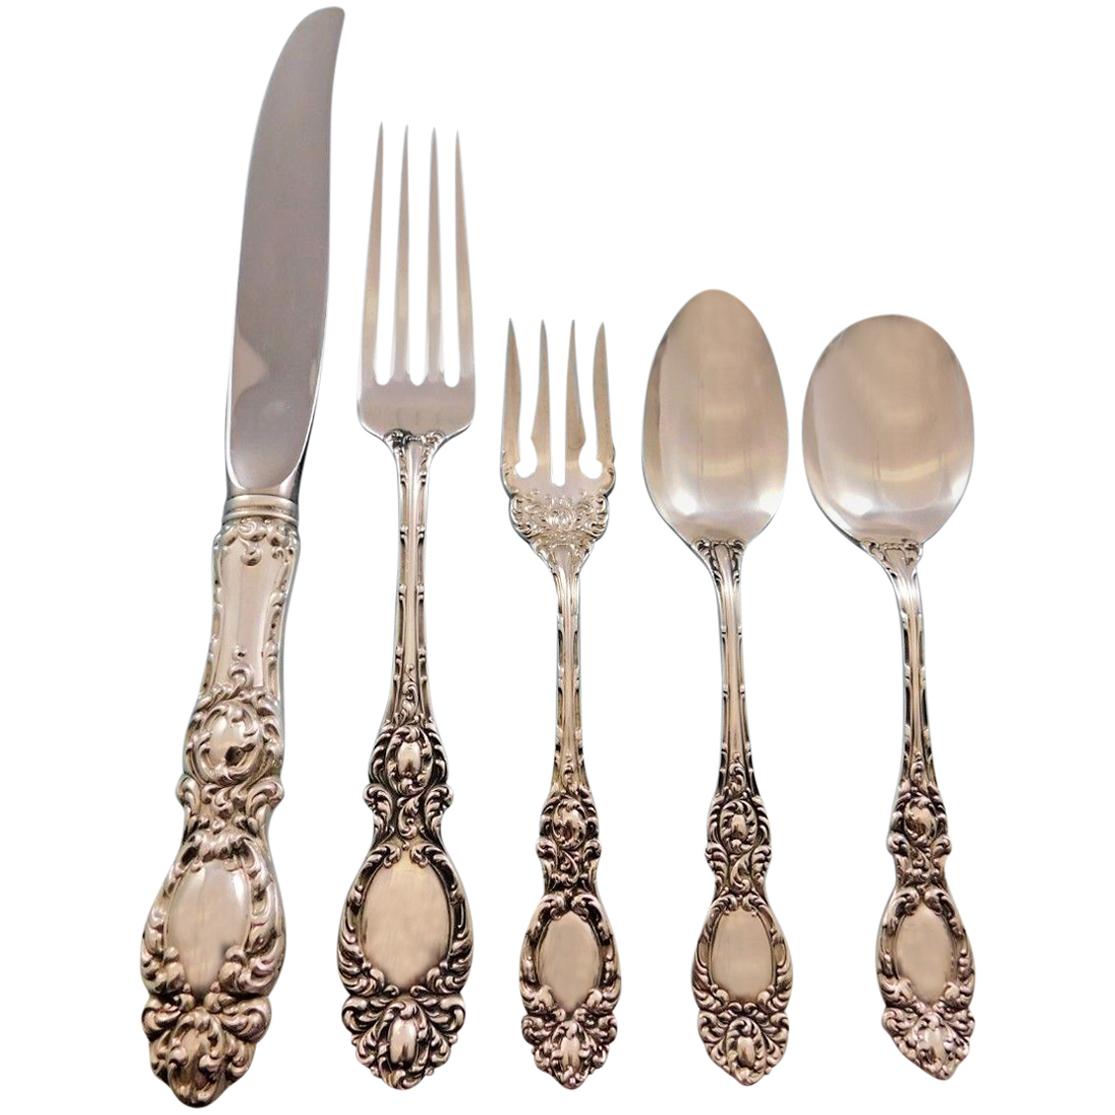 Lucerne by Wallace Sterling Silver Flatware Set for 8 Service 43 Pieces Dinner